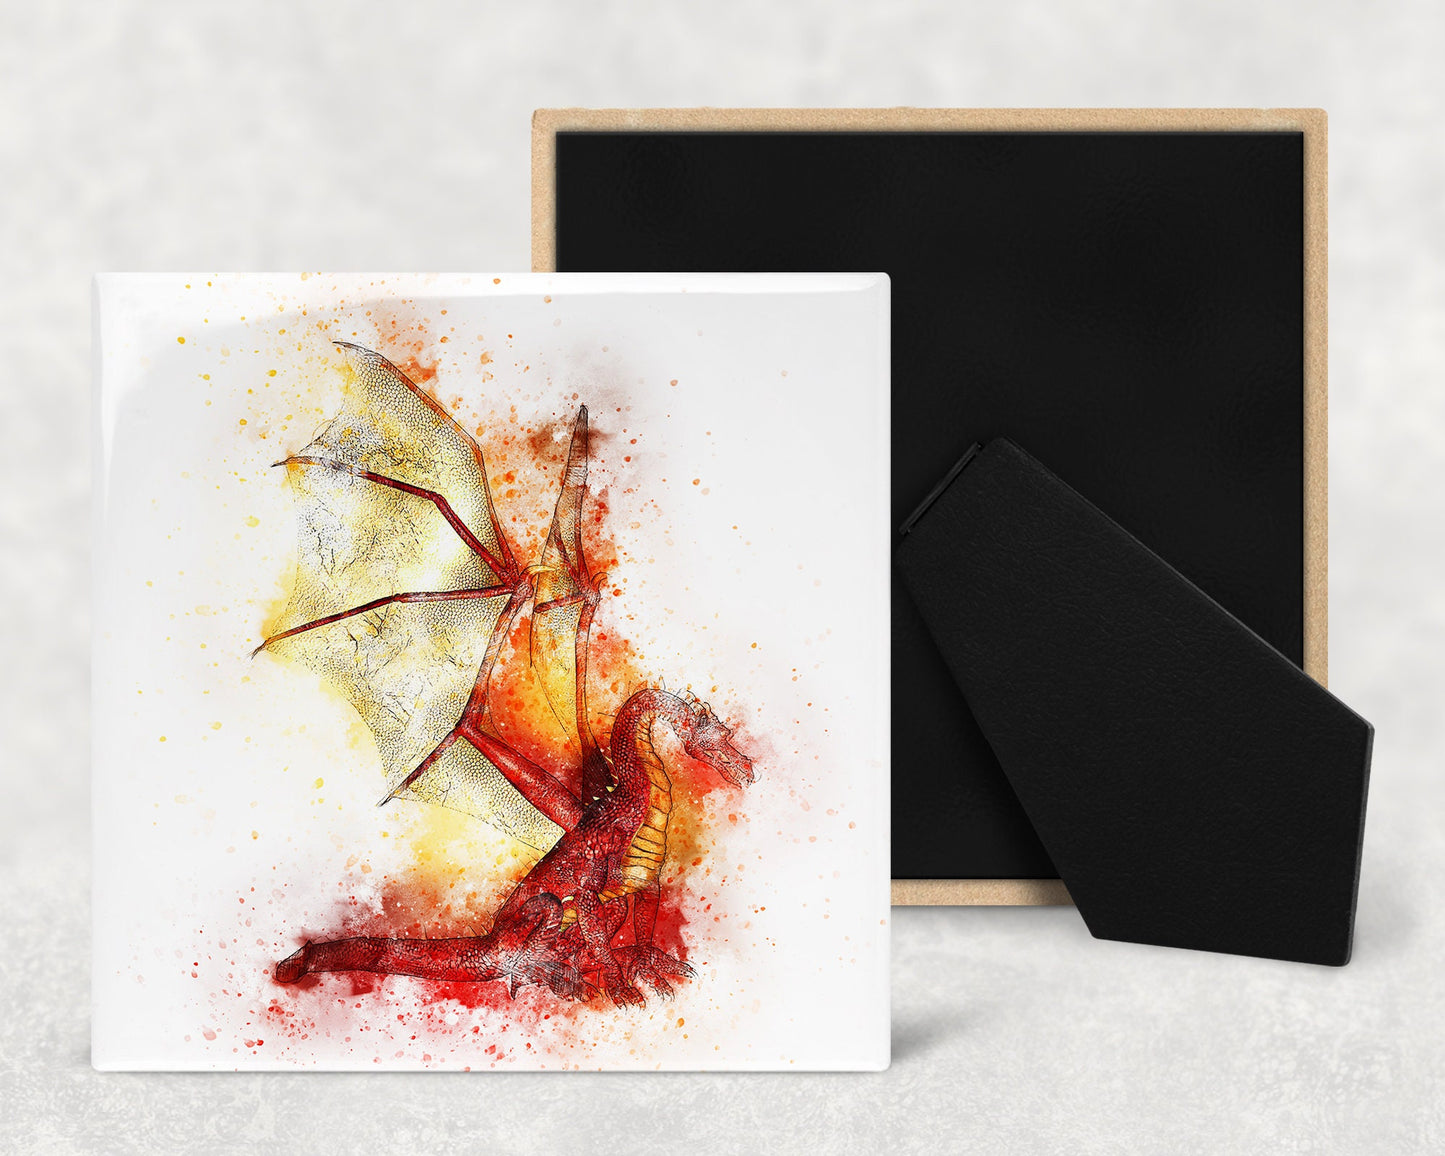 Watercolor Red Dragon Art Decorative Ceramic Tile with Optional Easel Back - Available in 3 Sizes